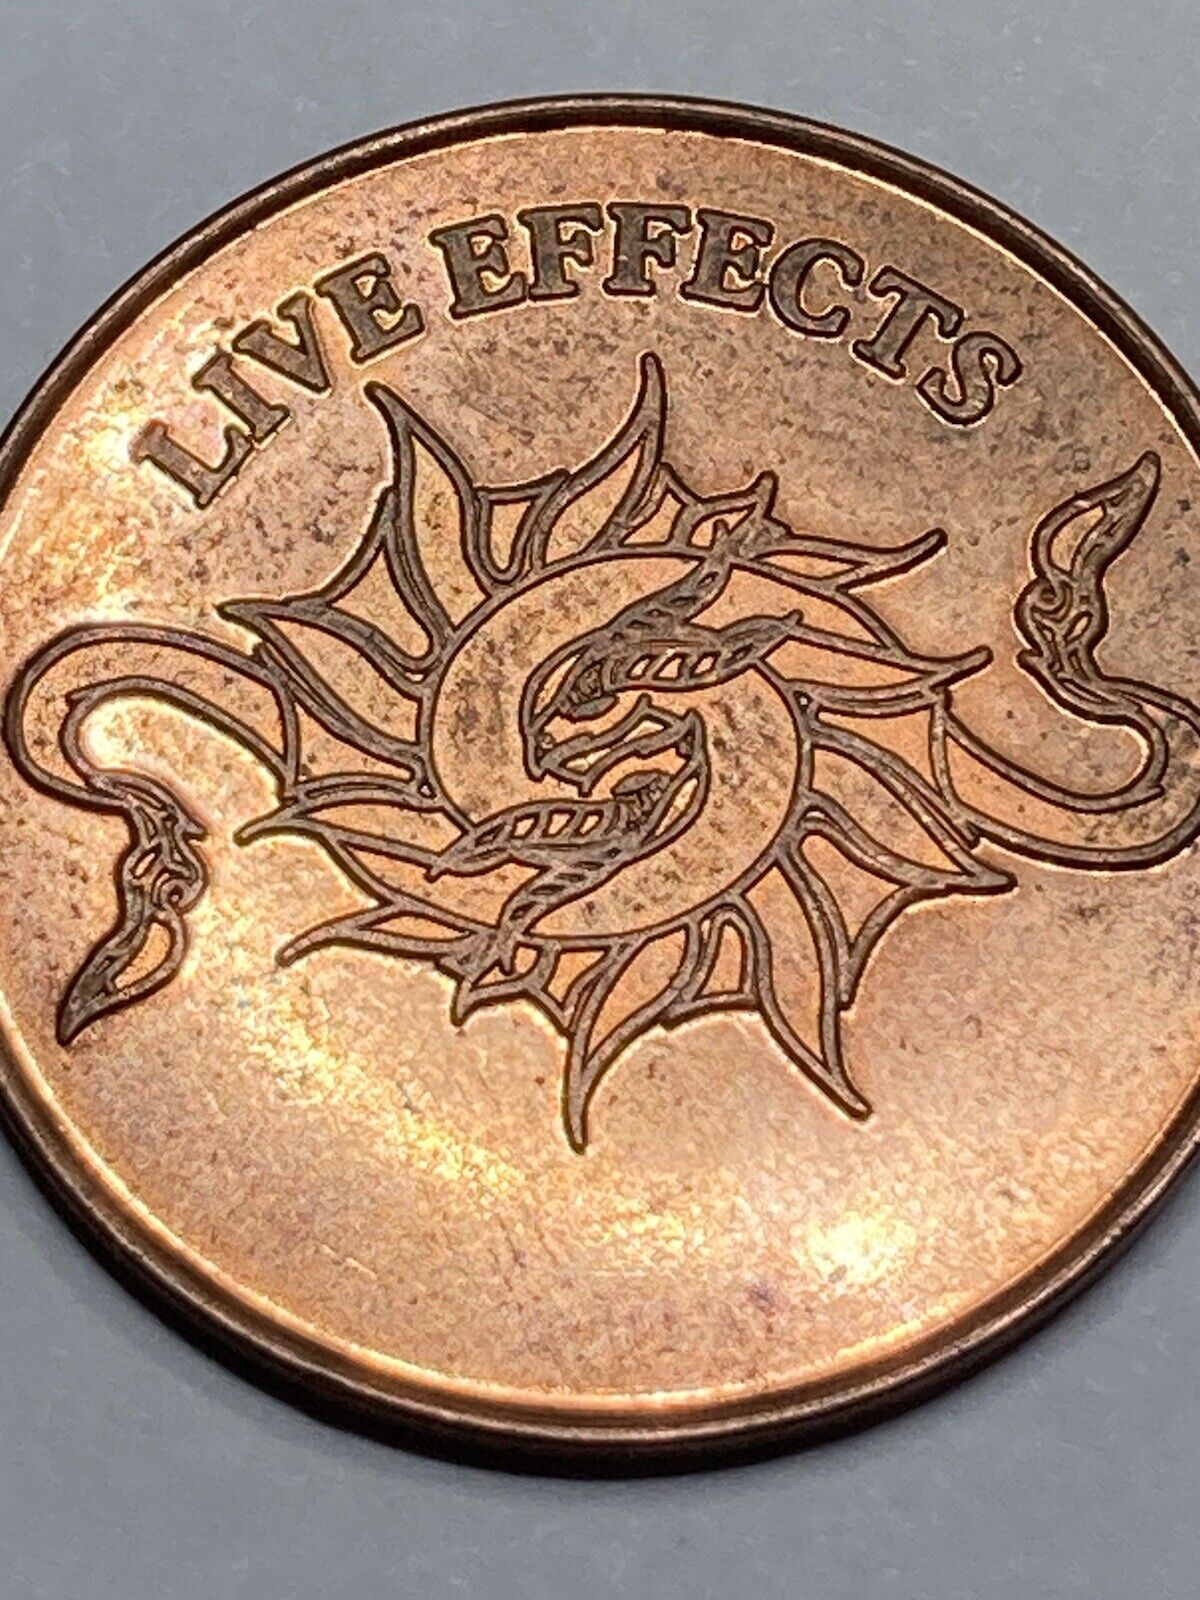 VINTAGE LIVE EFFECTS TOKEN - CITY OF AAYERZ - LOOK (#B2)